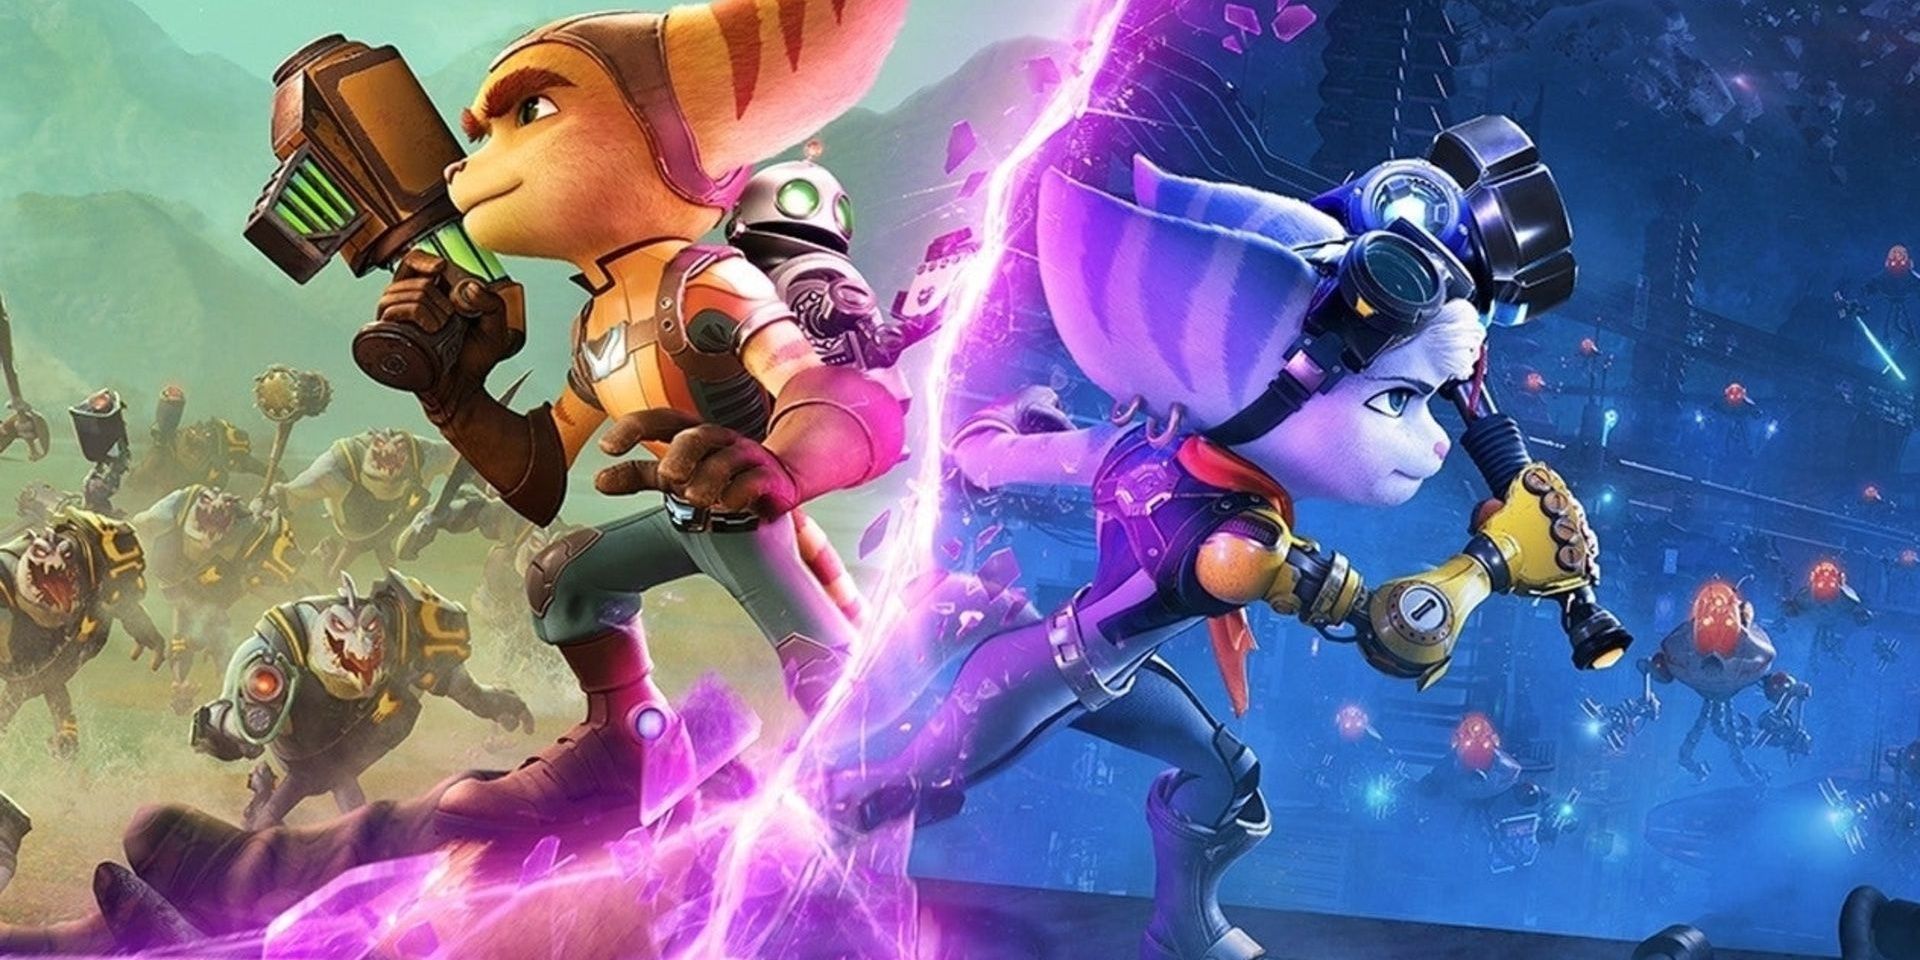 poster for Ratchet &amp; Clank Rift Apart featuring Ratchet and Rivet fighting enemies